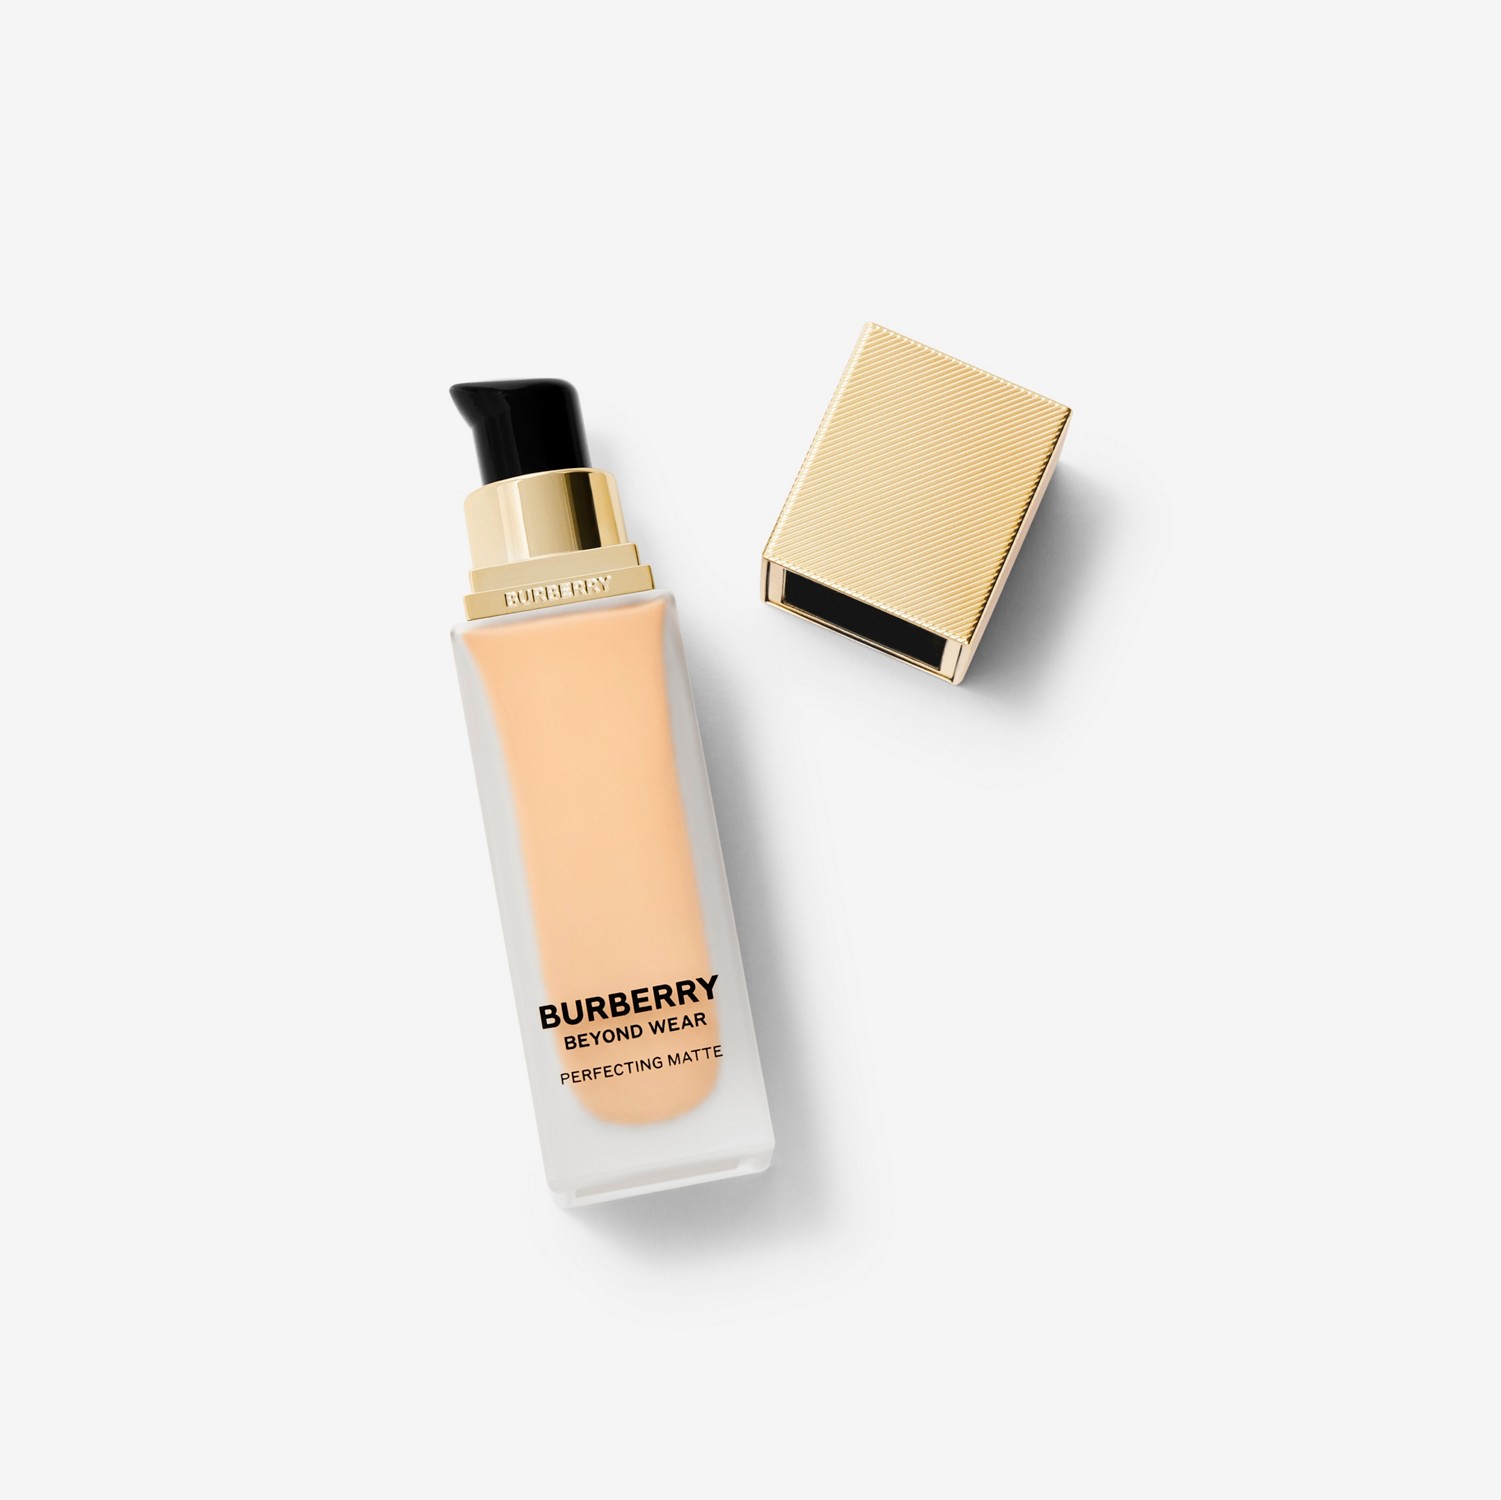 Beyond Wear Perfecting Matte Foundation – 20 Fair Warm - Mujer | Burberry® oficial